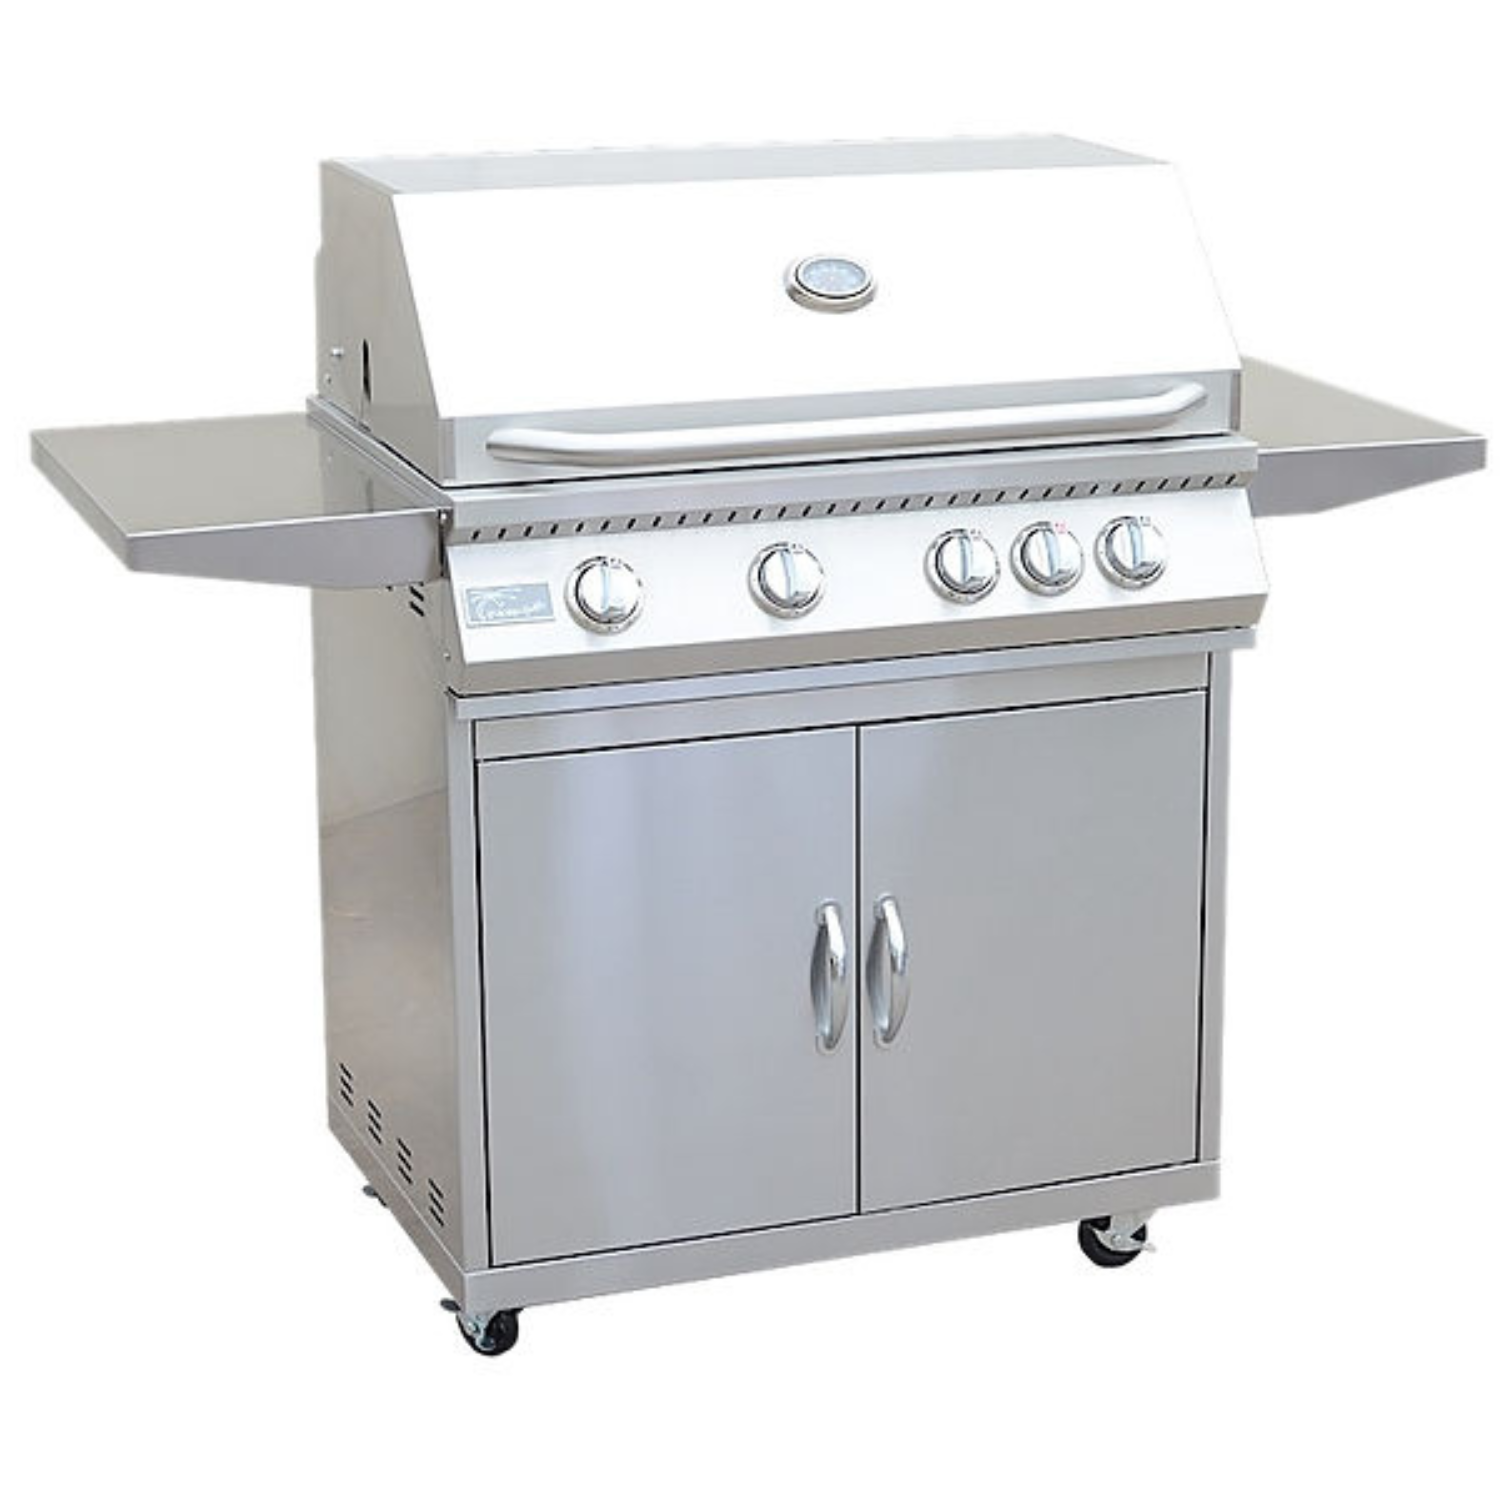 4 Burner 32 Inch Cart Model BBQ Grill With Locking Casters 304 Stainless Steel - ElitePlayPro